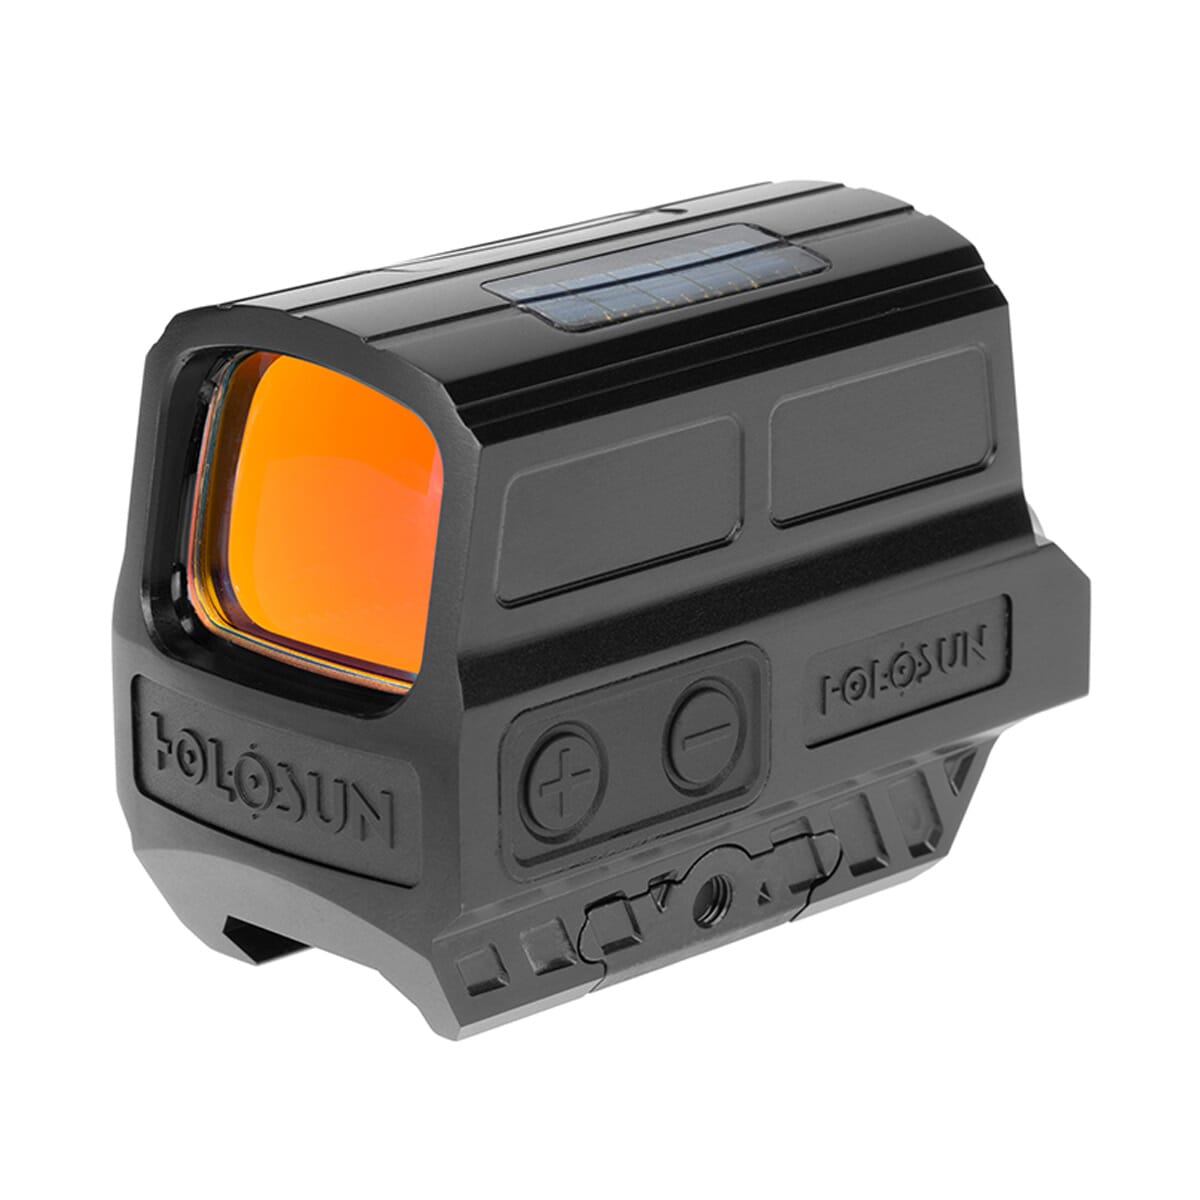 Holosun HE512C-GD Gold Multi-Reticle Circle Dot Enclosed Reflex Sight with Solar Failsafe and Shake Awake HE512C-GD